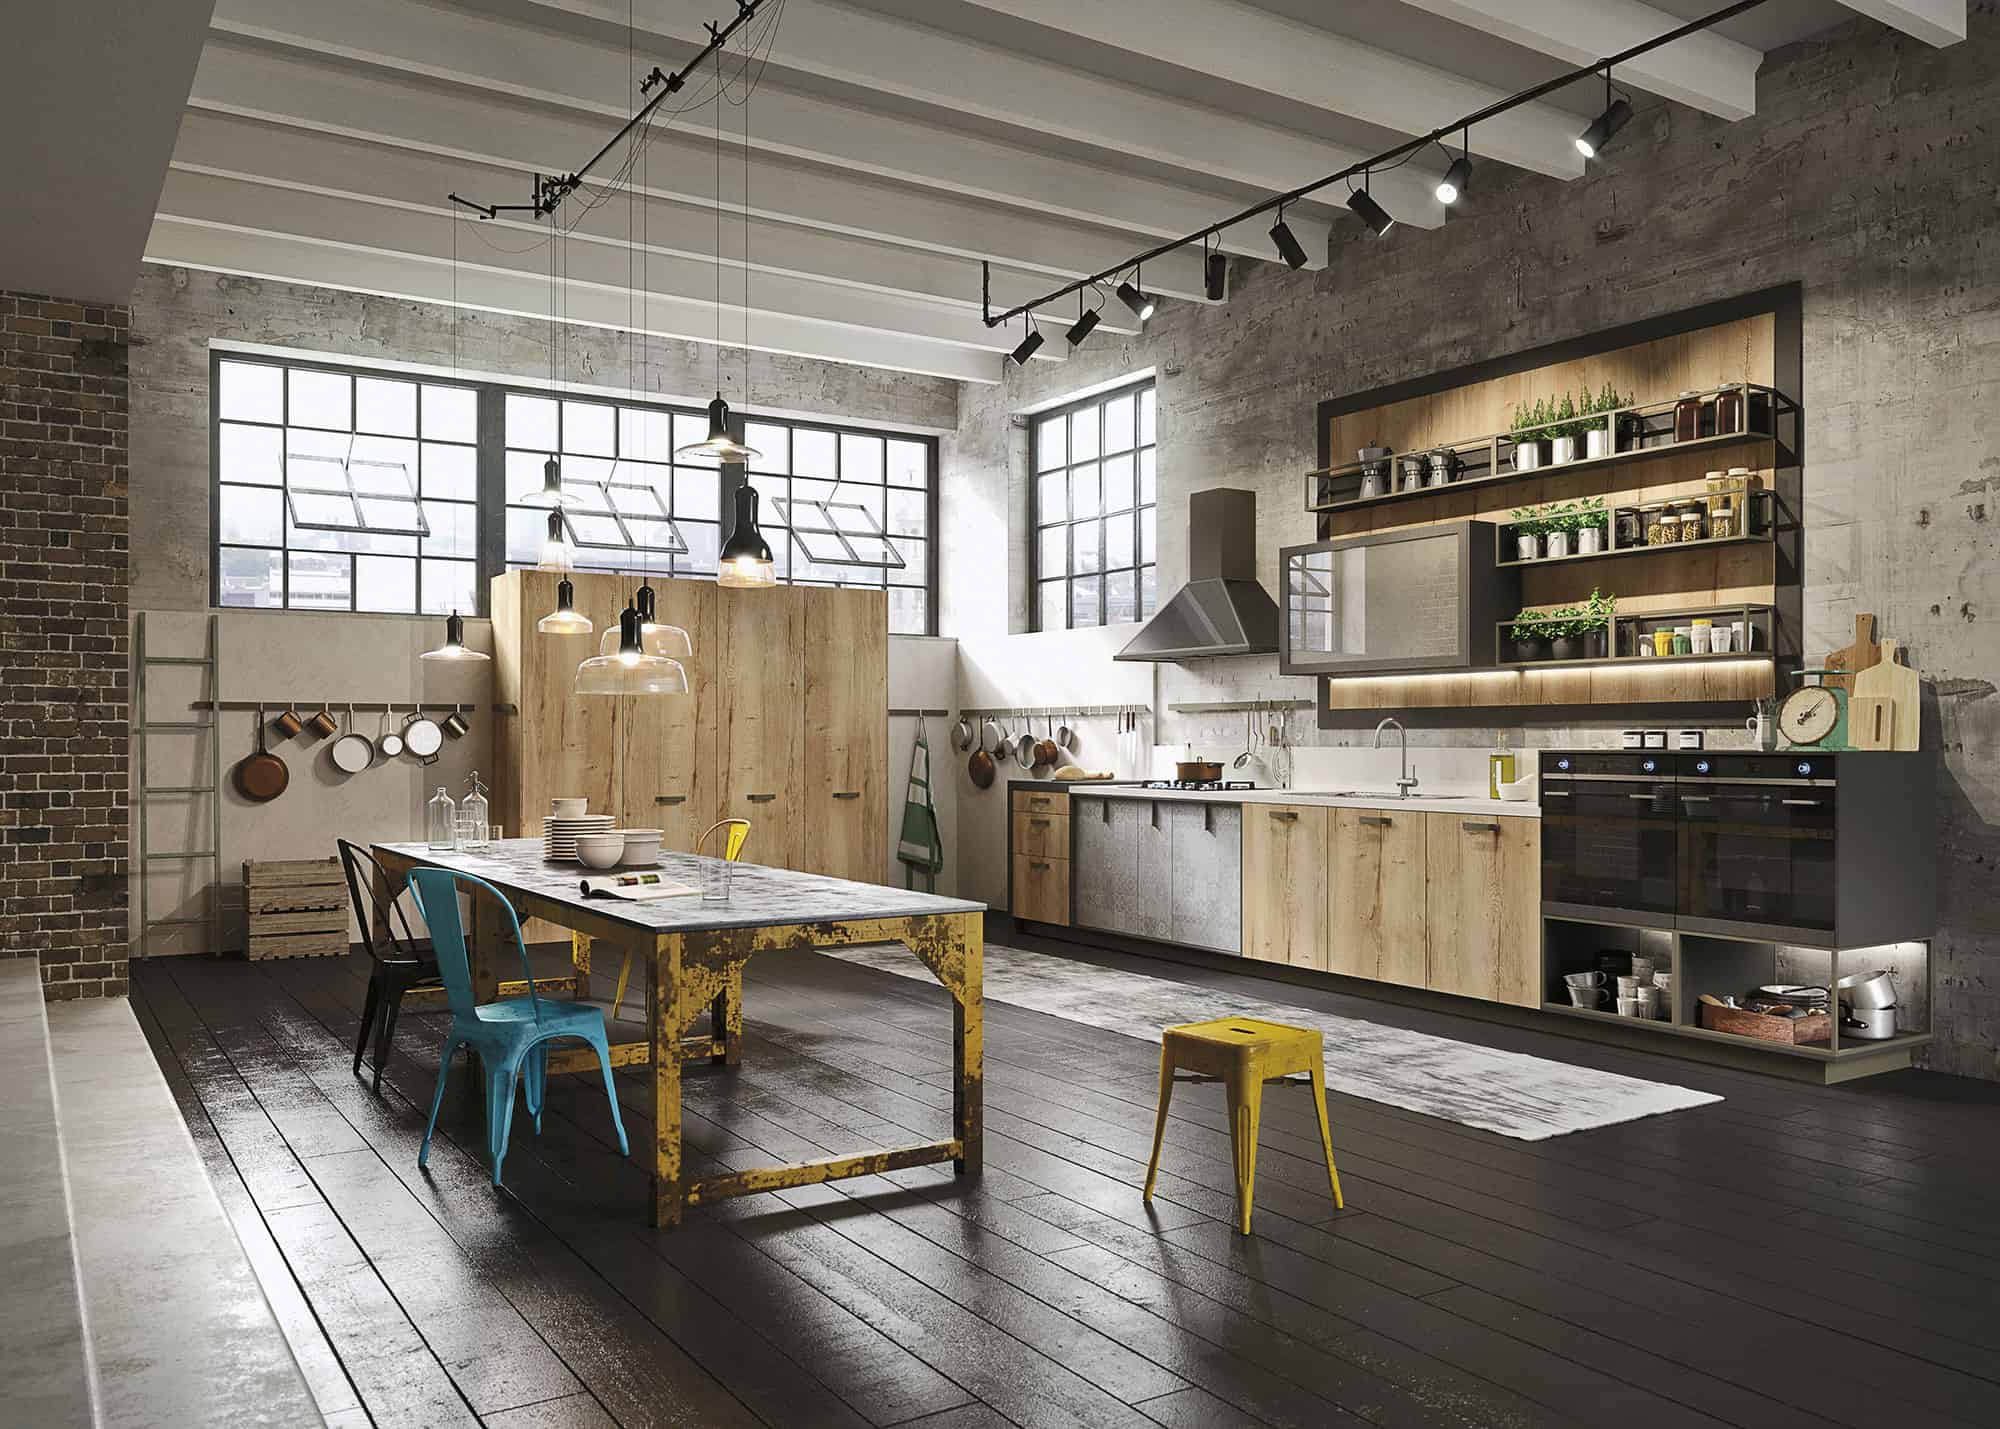 Tips for decorating the kitchen in the Loft style